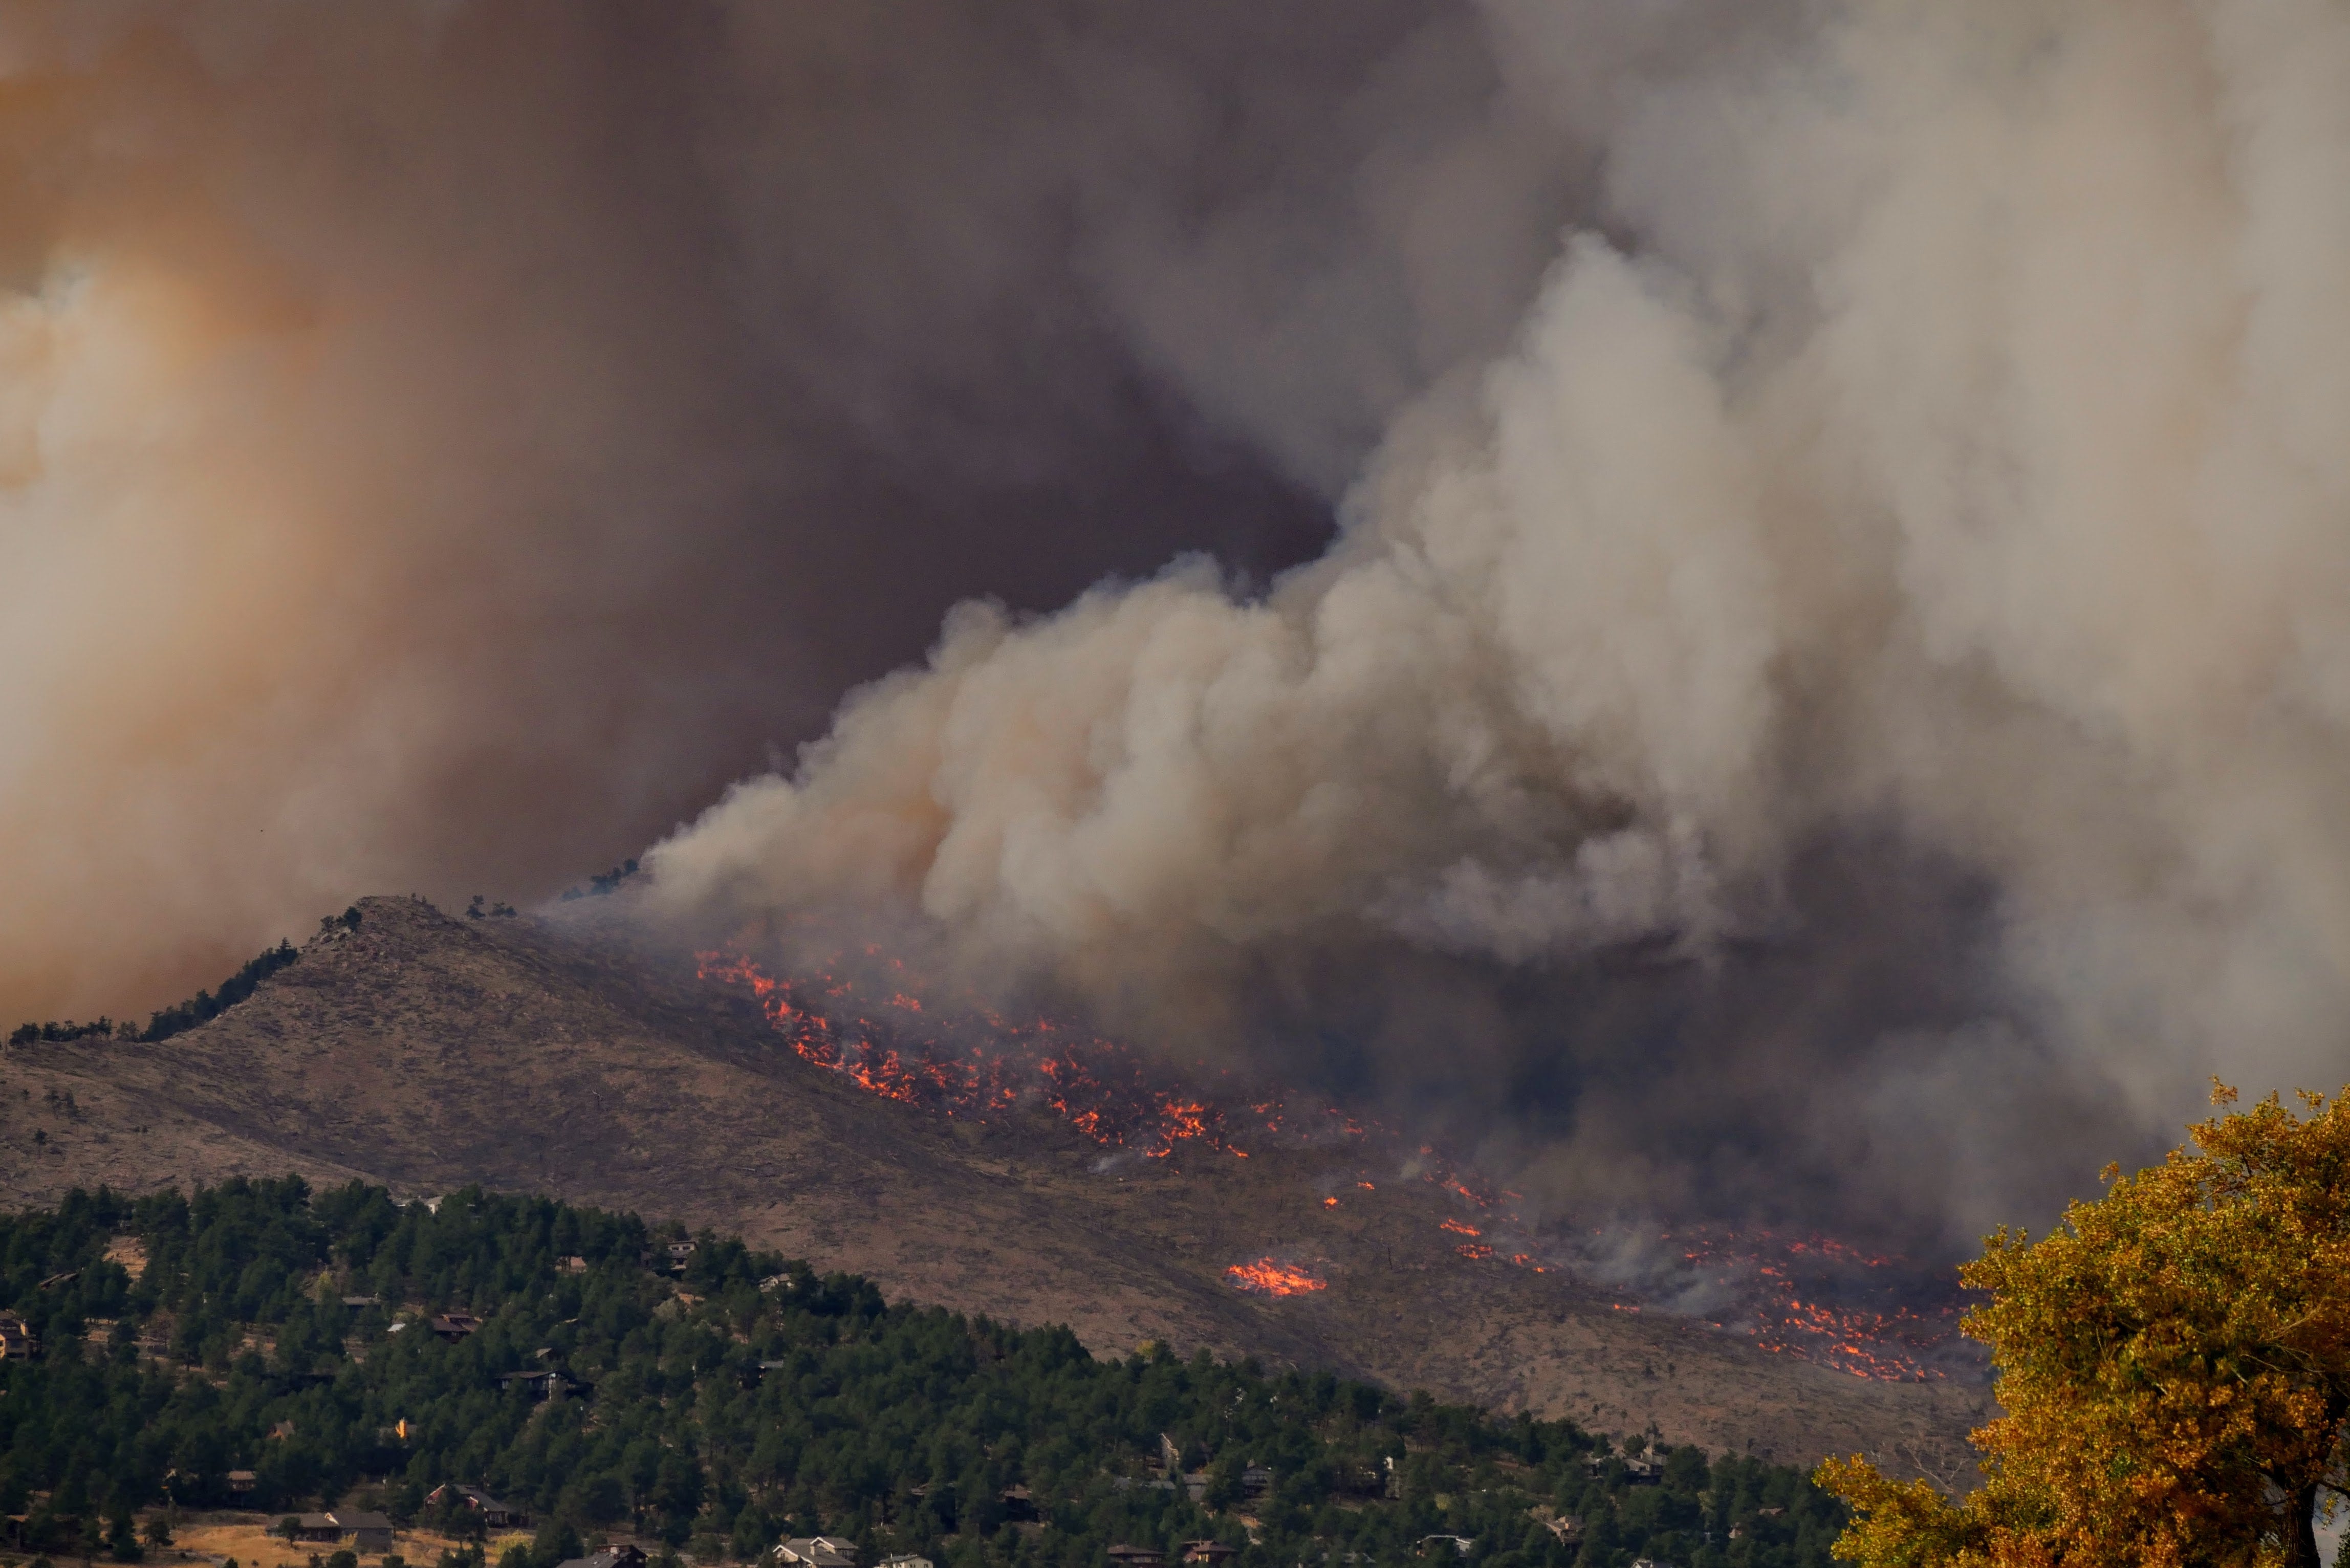 What can we do to protect our family during the wildfire season?